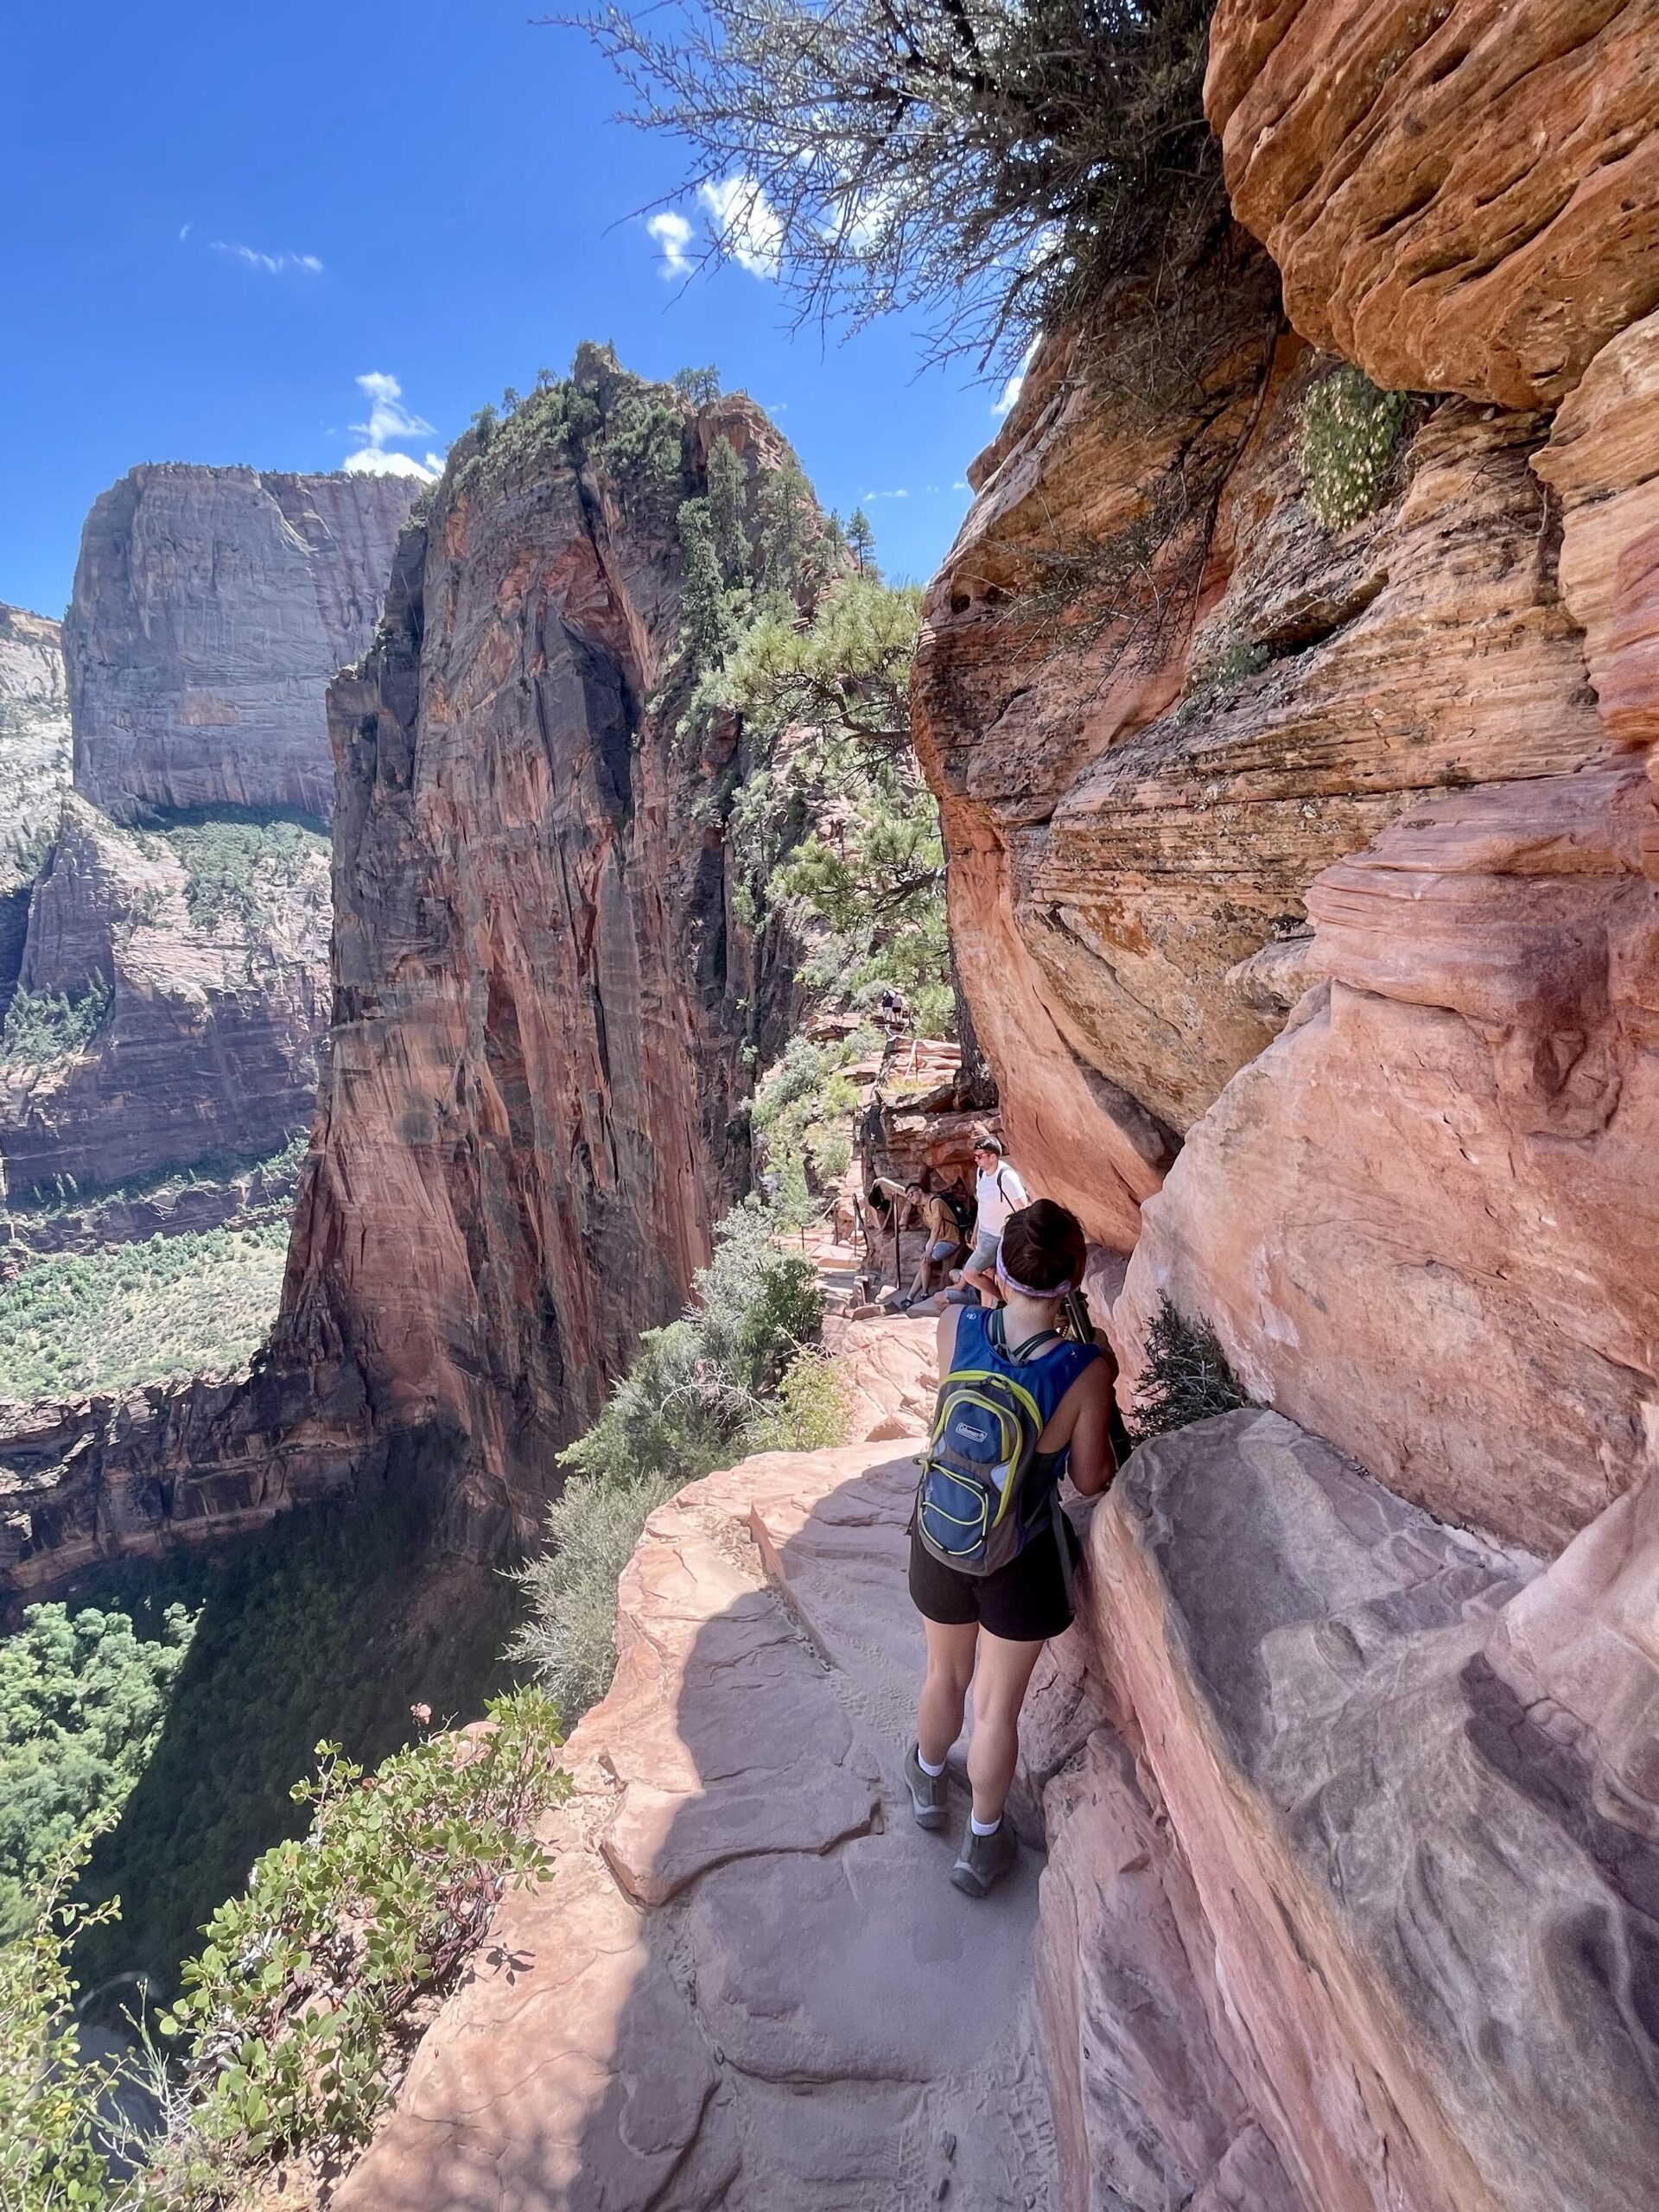 people hiking Angels Landing holding onto chains with a steep drop on the left side